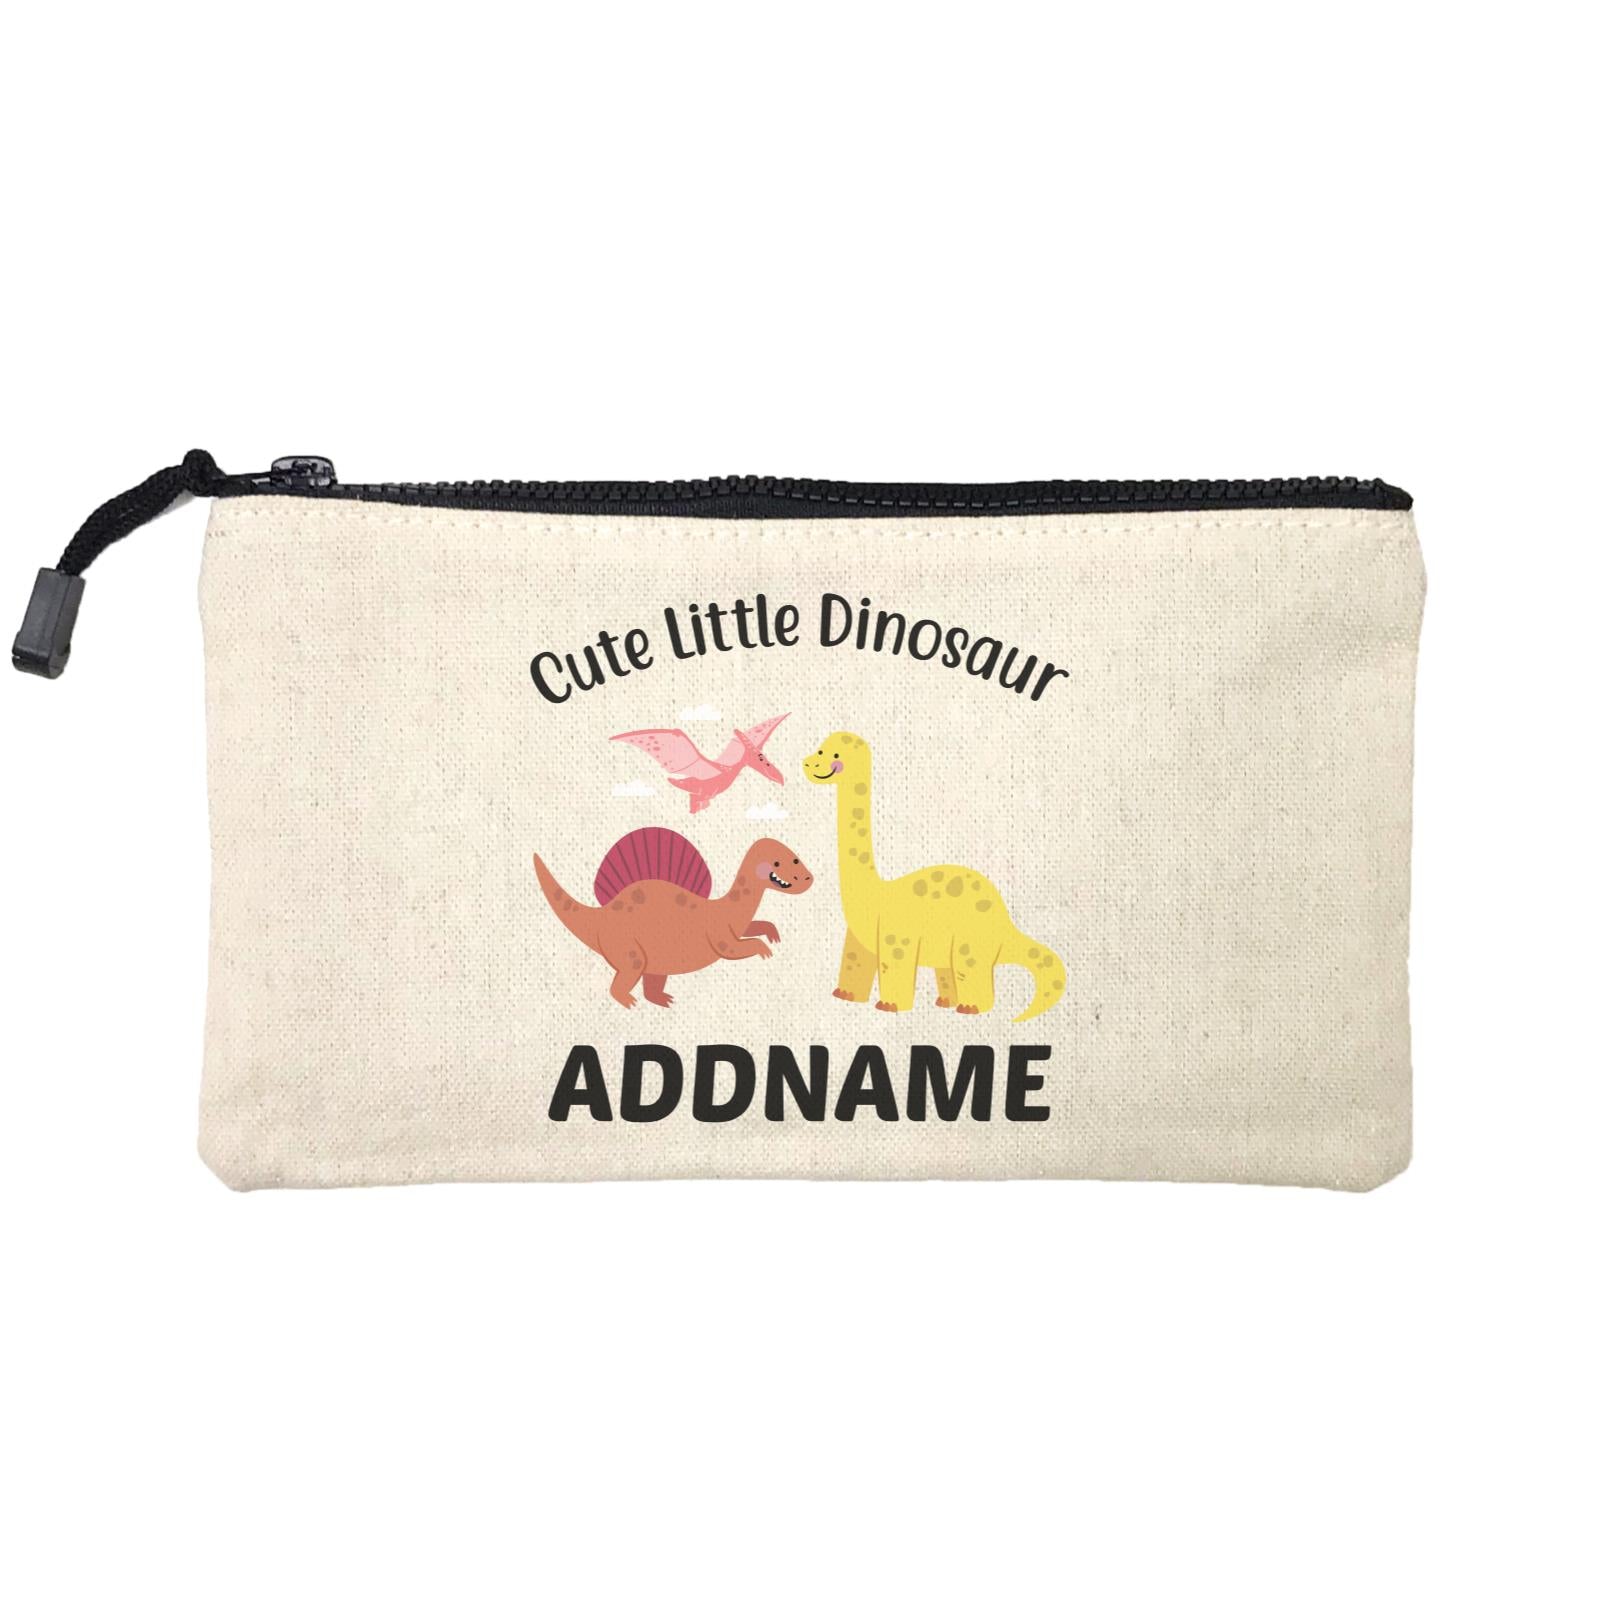 Cute Little Dinosaur Addname SP Stationery Pouch